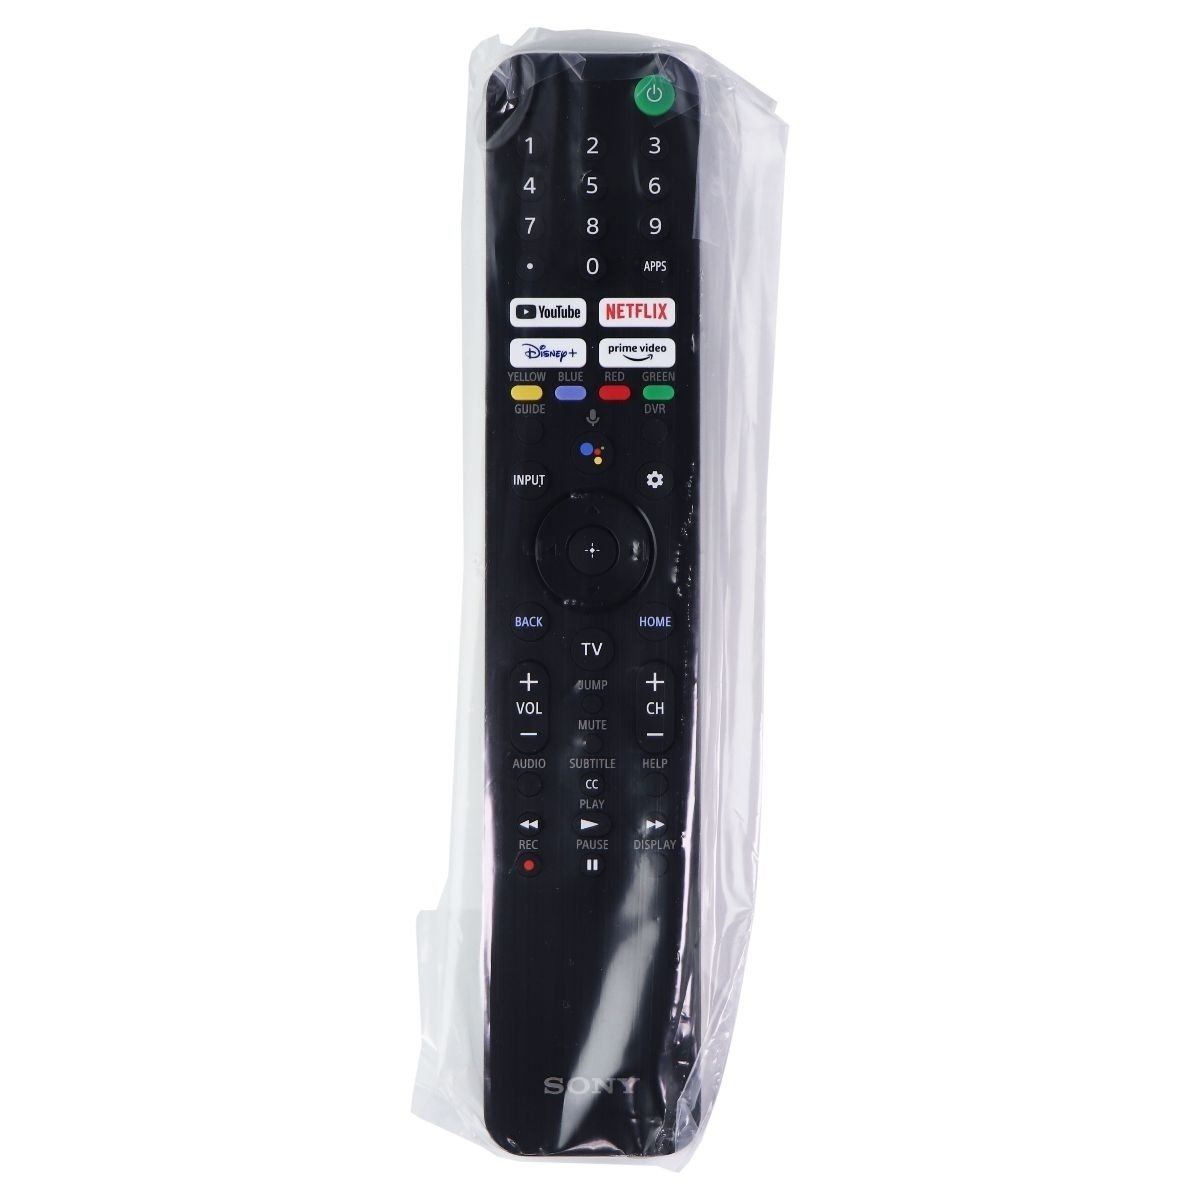 Sony Remote Control (RMF-TX520U) With Microphone For Sony Smart TVs - Black